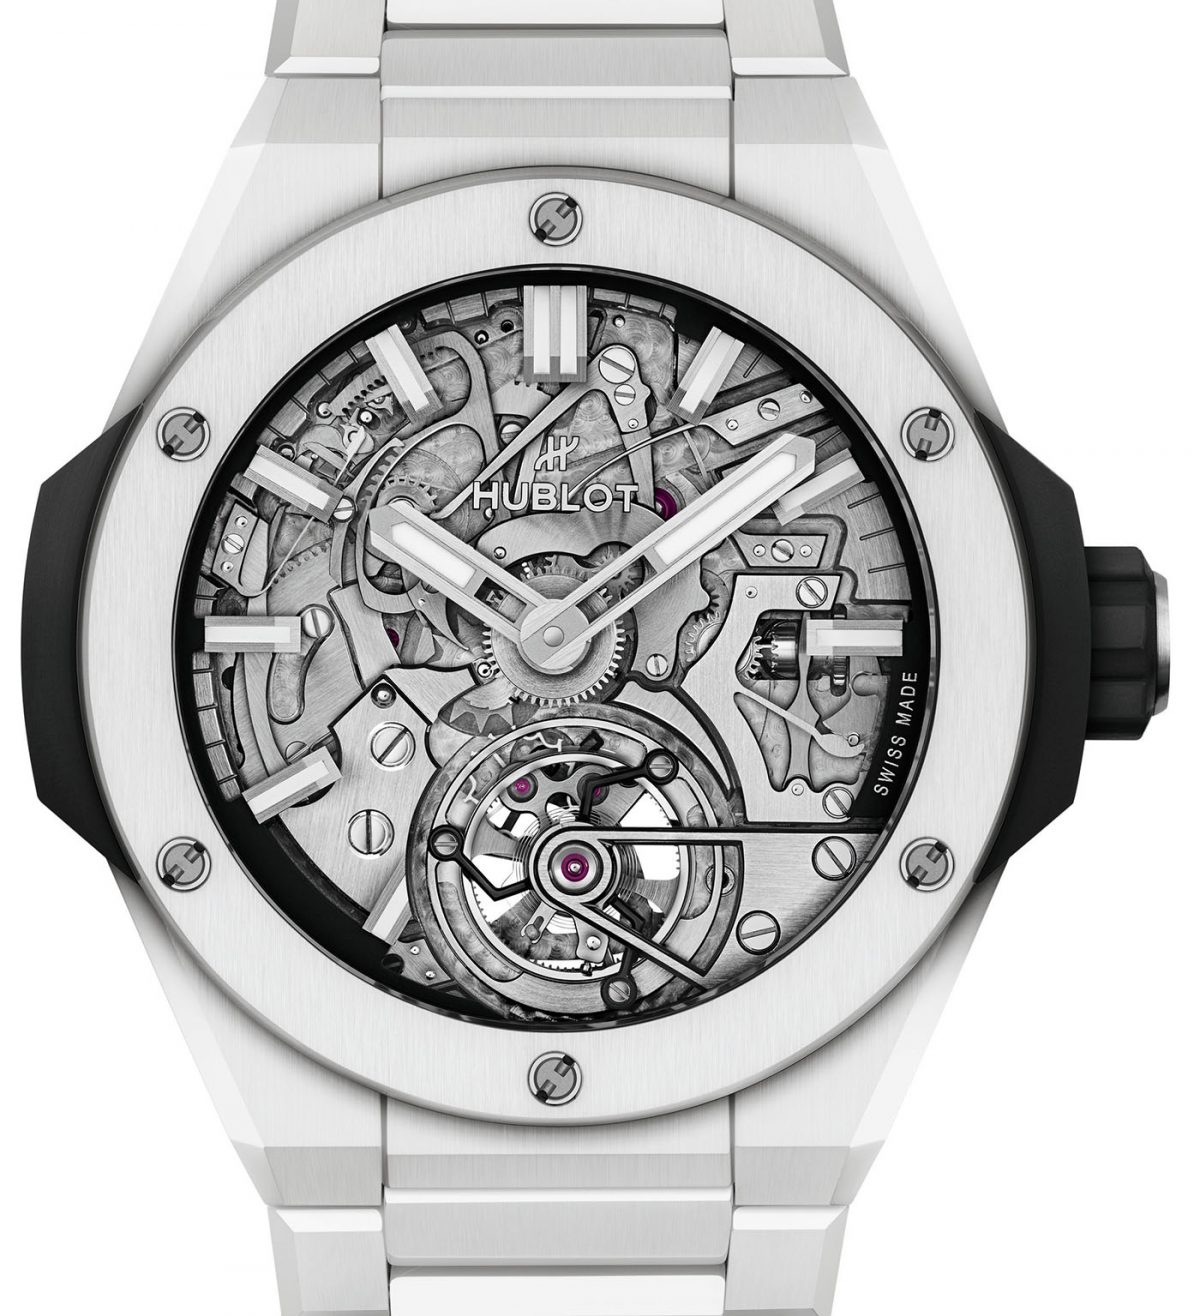 UK Perfect Replica Hublot Unveils Limited-Edition Big Bang Integral Tourbillon Cathedral Minute Repeater Watch With Full Ceramic Case